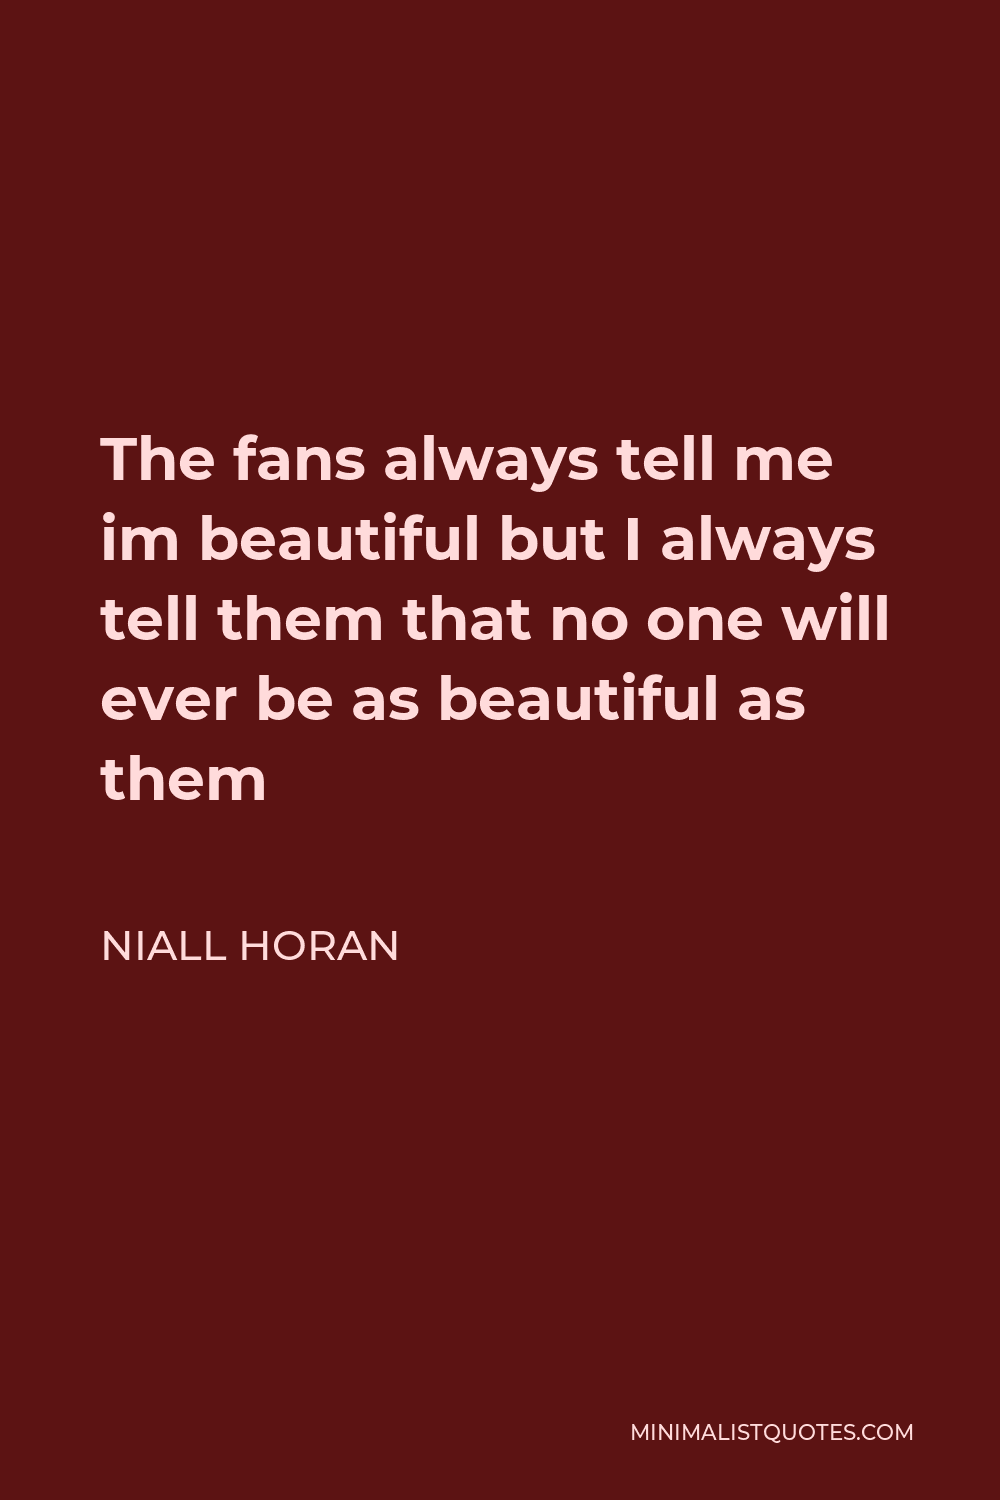 Niall Horan Quote - The fans always tell me im beautiful but I always tell them that no one will ever be as beautiful as them